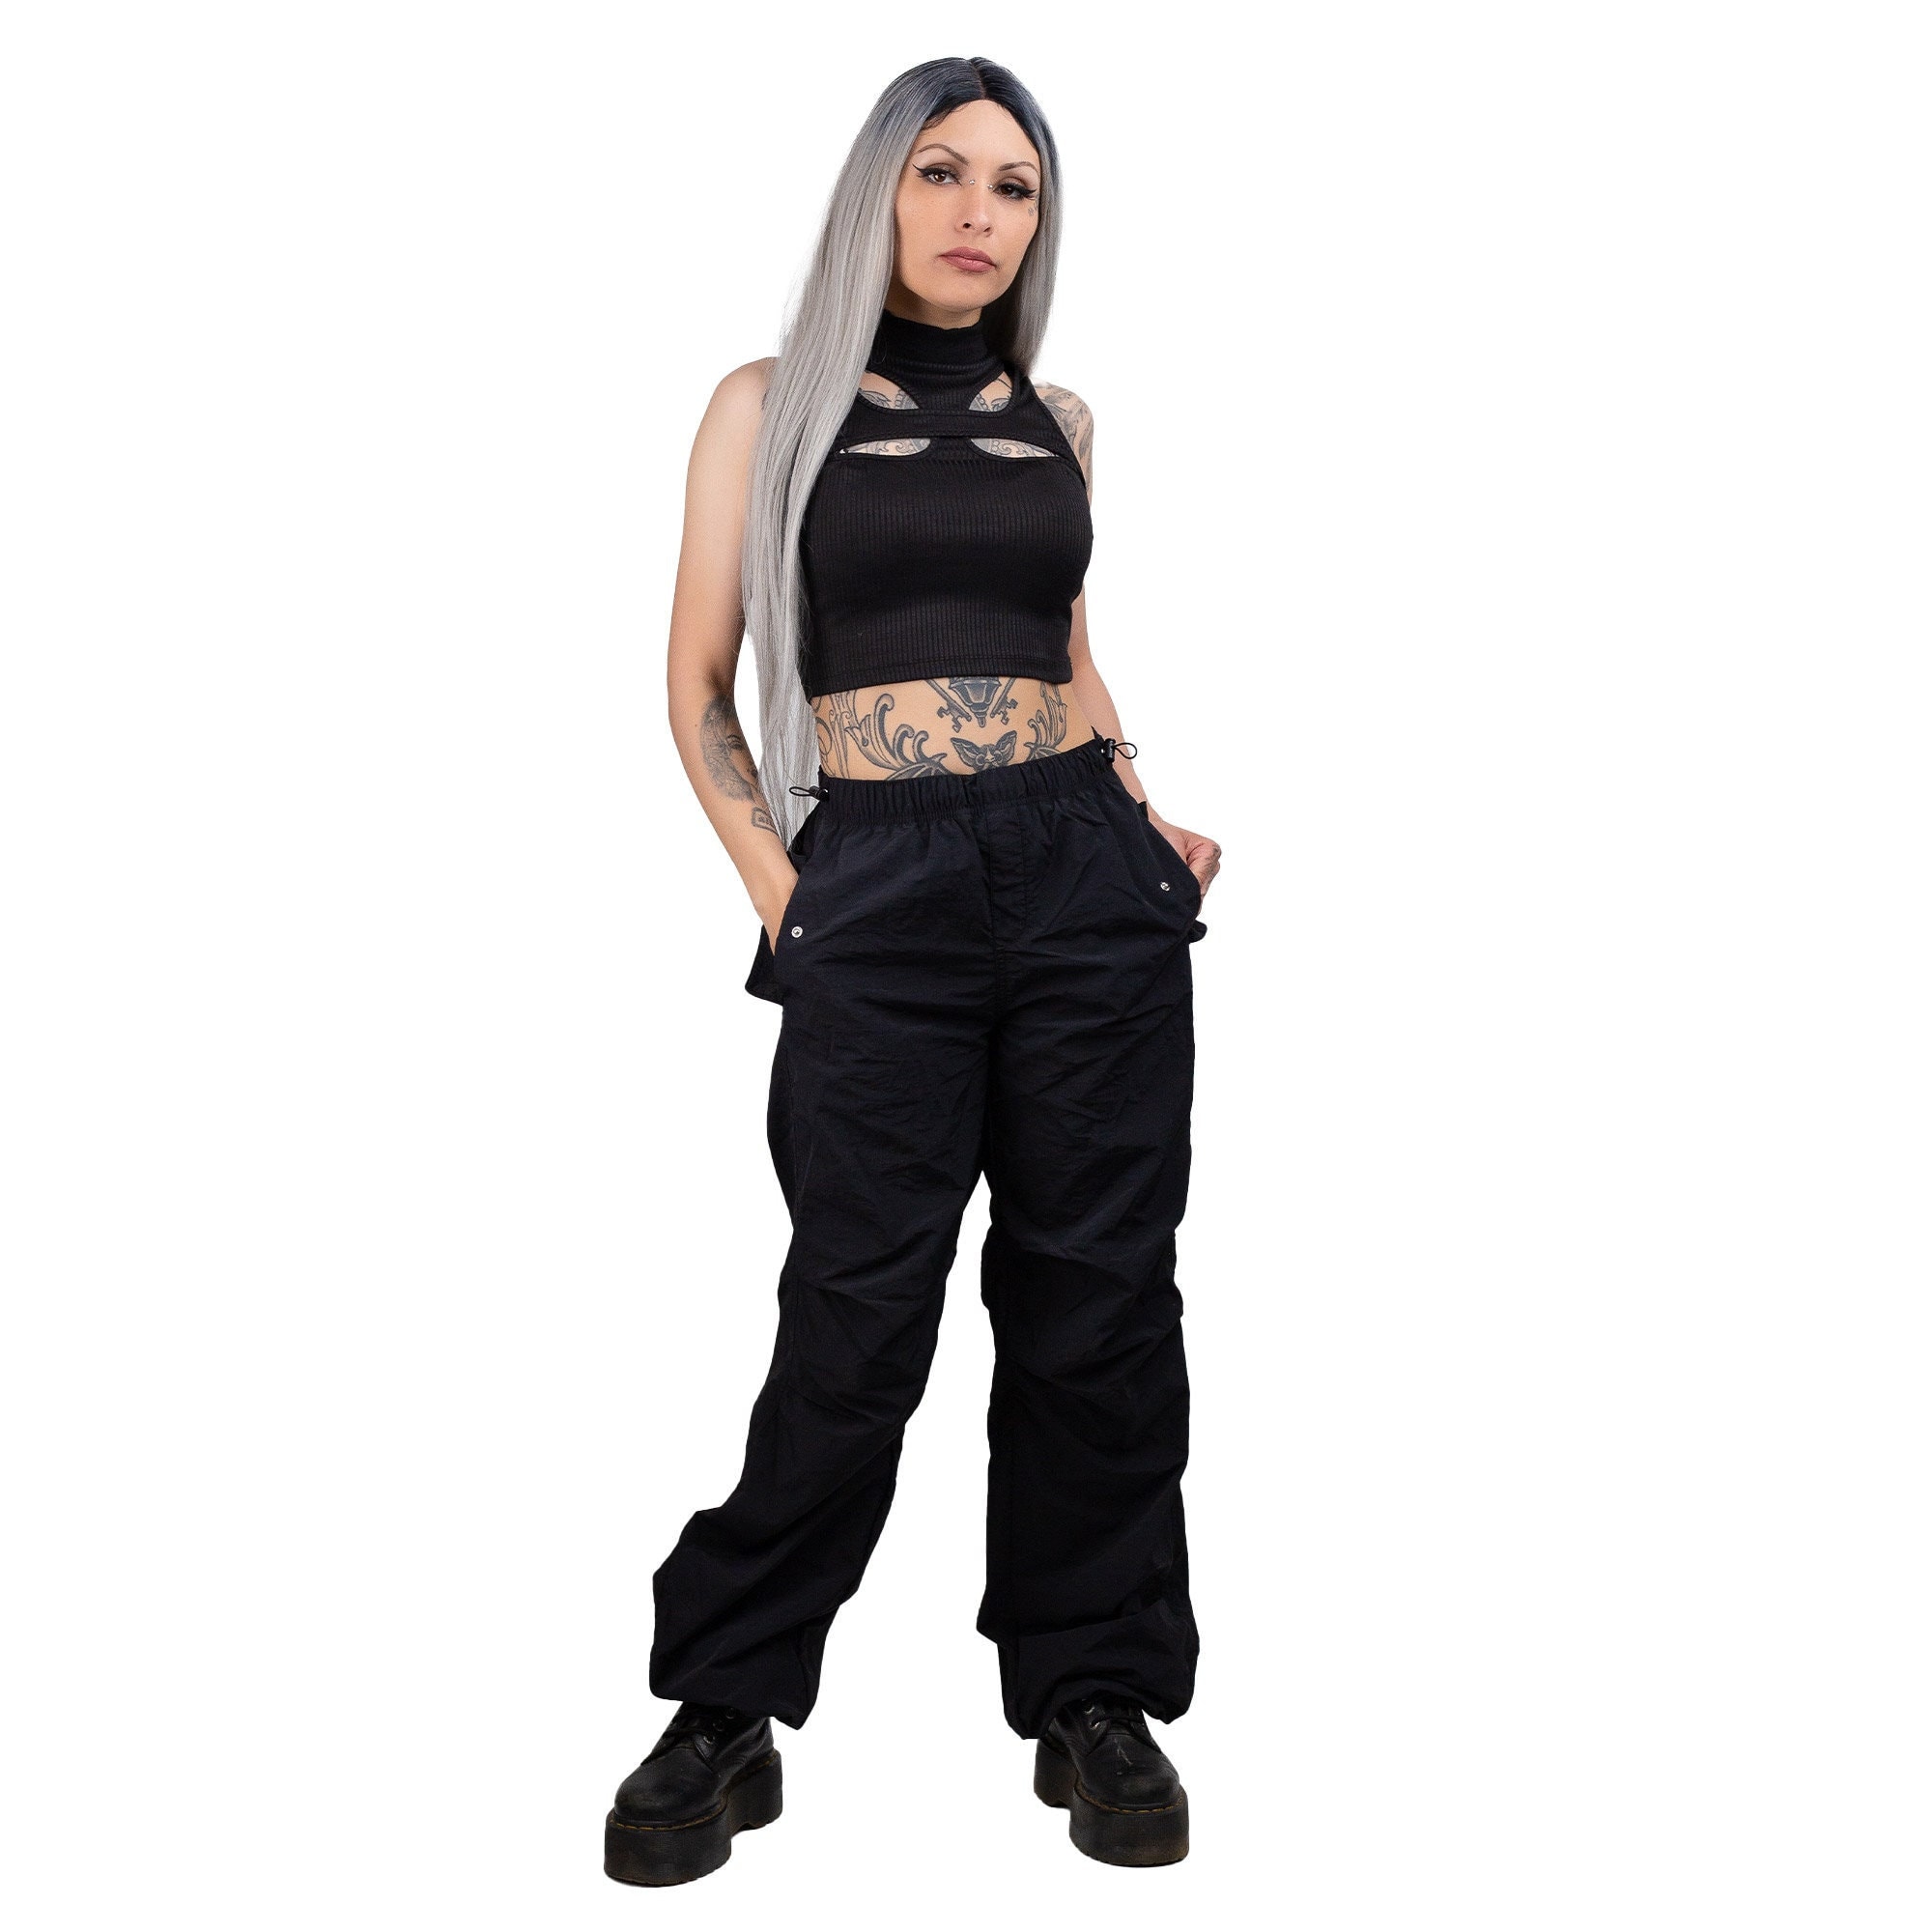 Holographic Women's Reflective Rainbow Pants, Reflective Cargo Pants,  Psychedelic Multi-pocket Pants, Rave Outfit Concert Clothing 